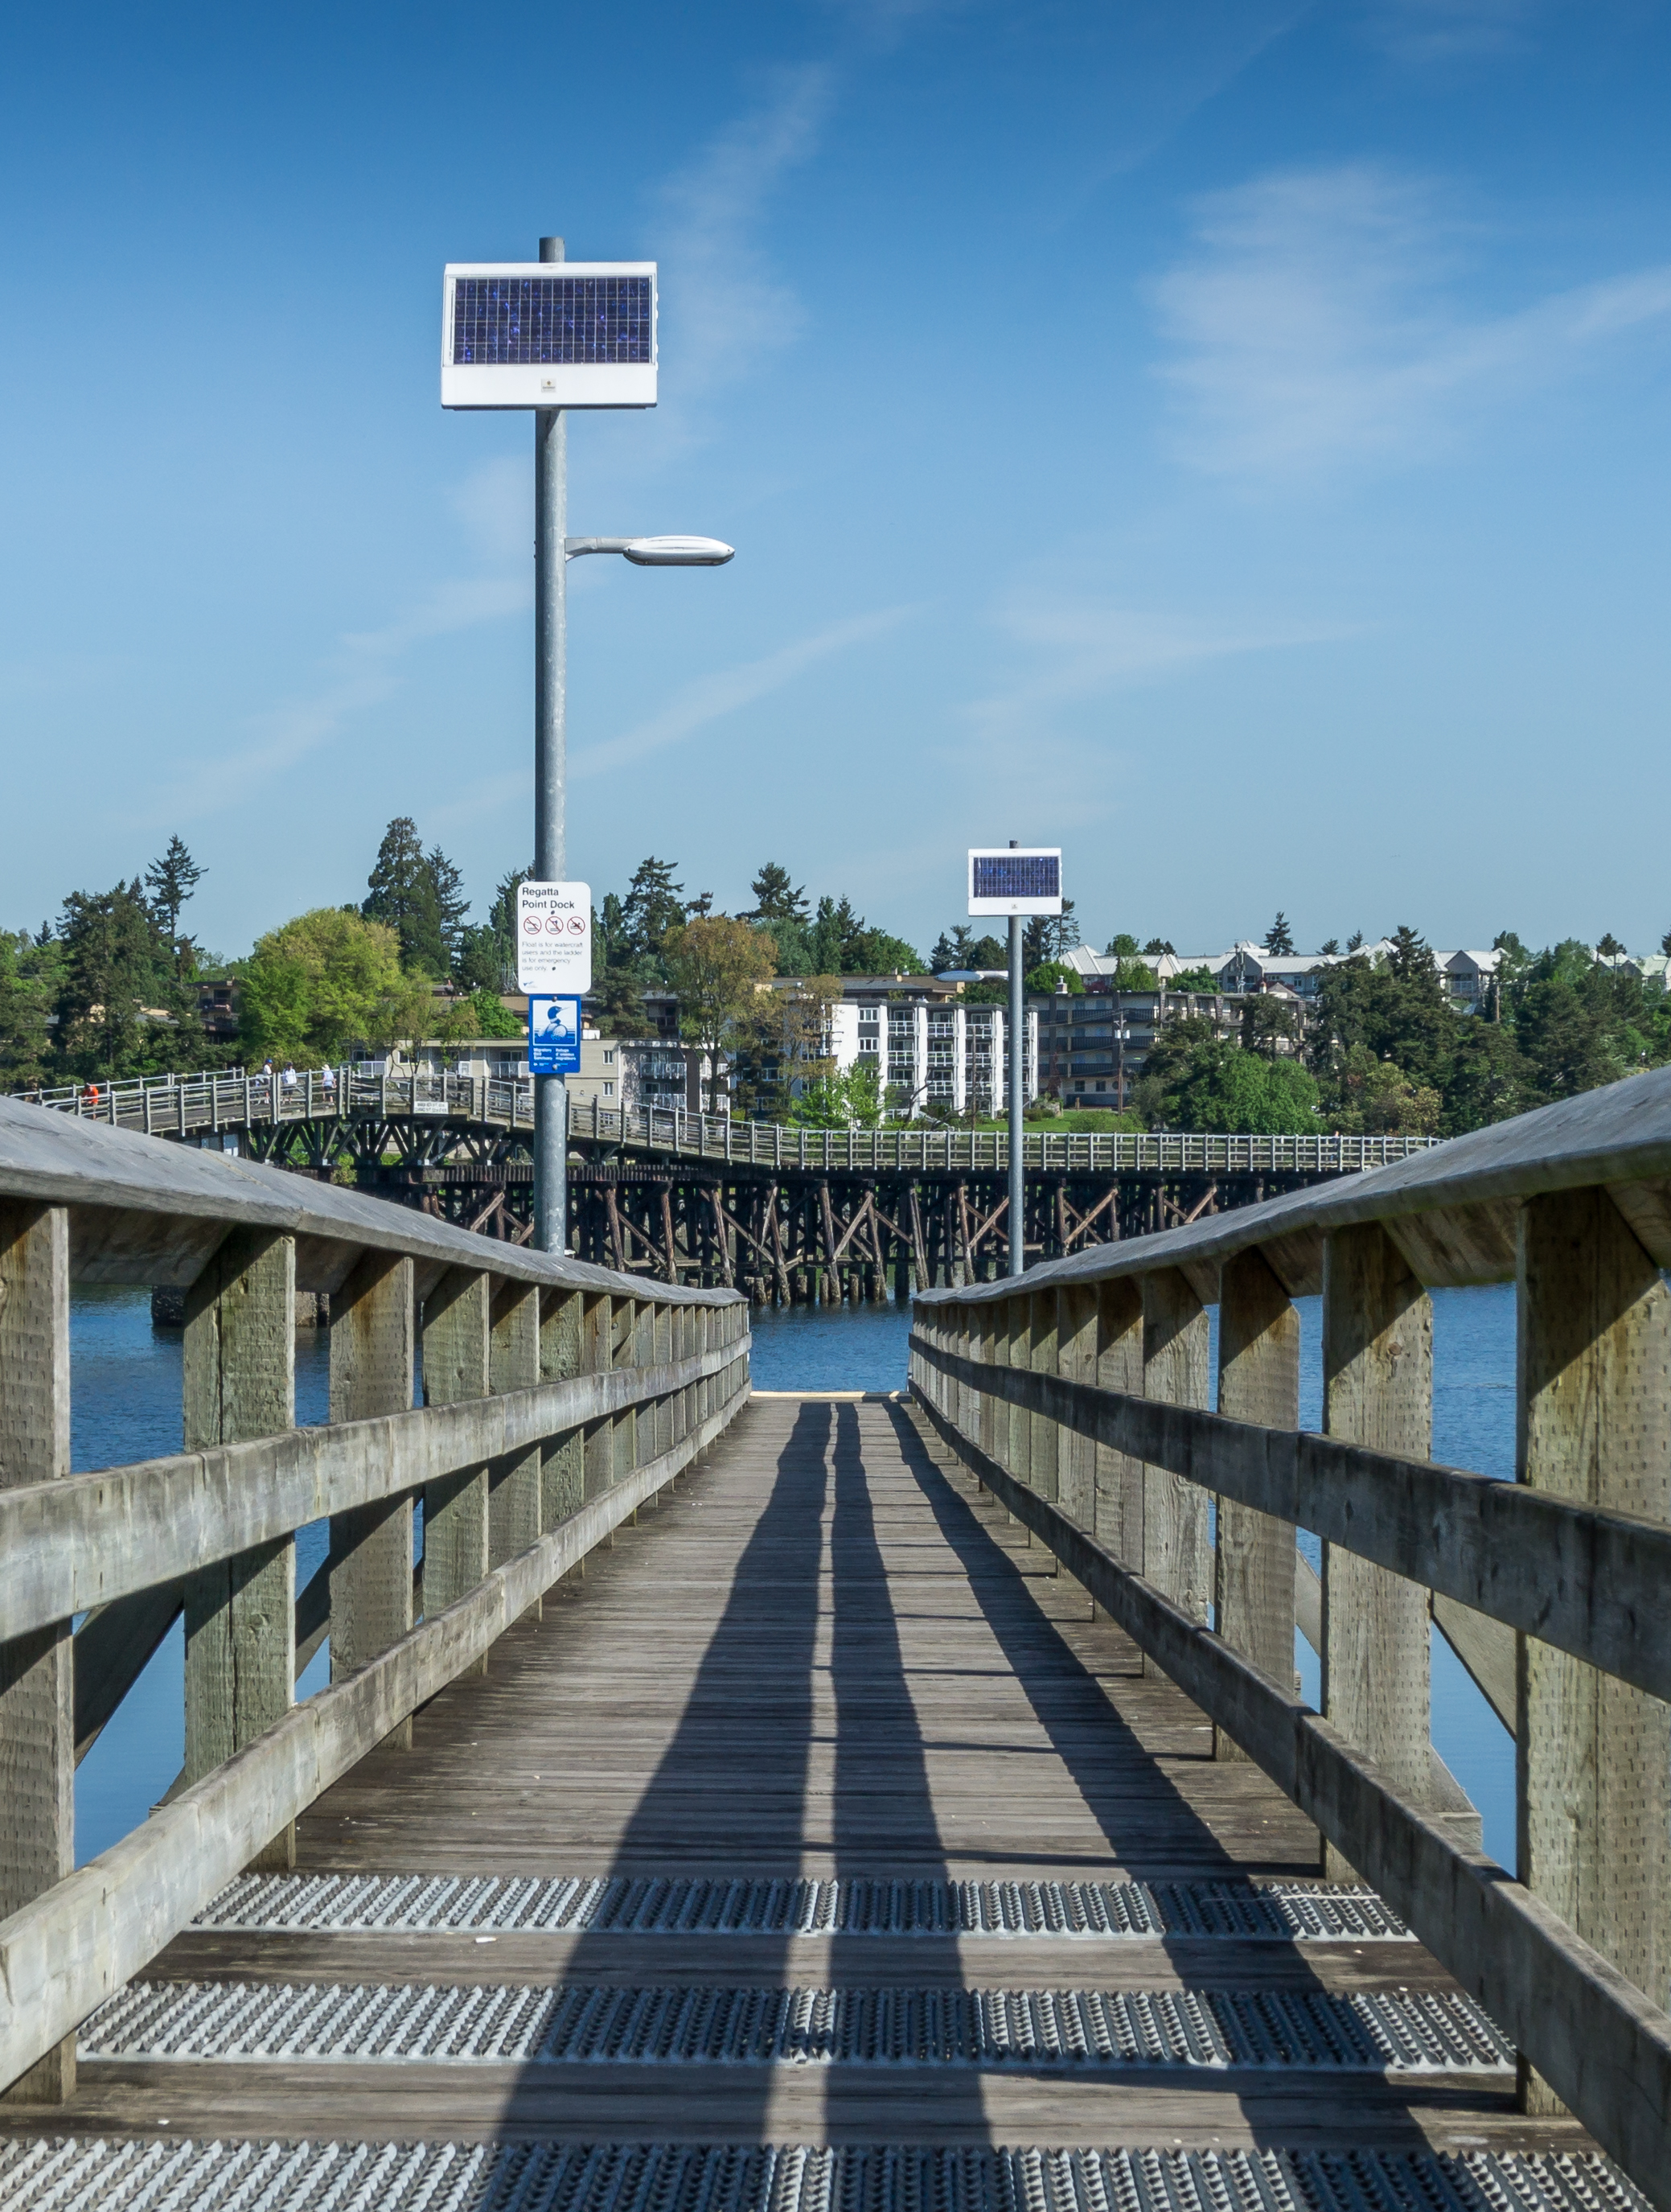 A pier with street lamps running on solar energy, Victoria, British Columbia, Canada 02